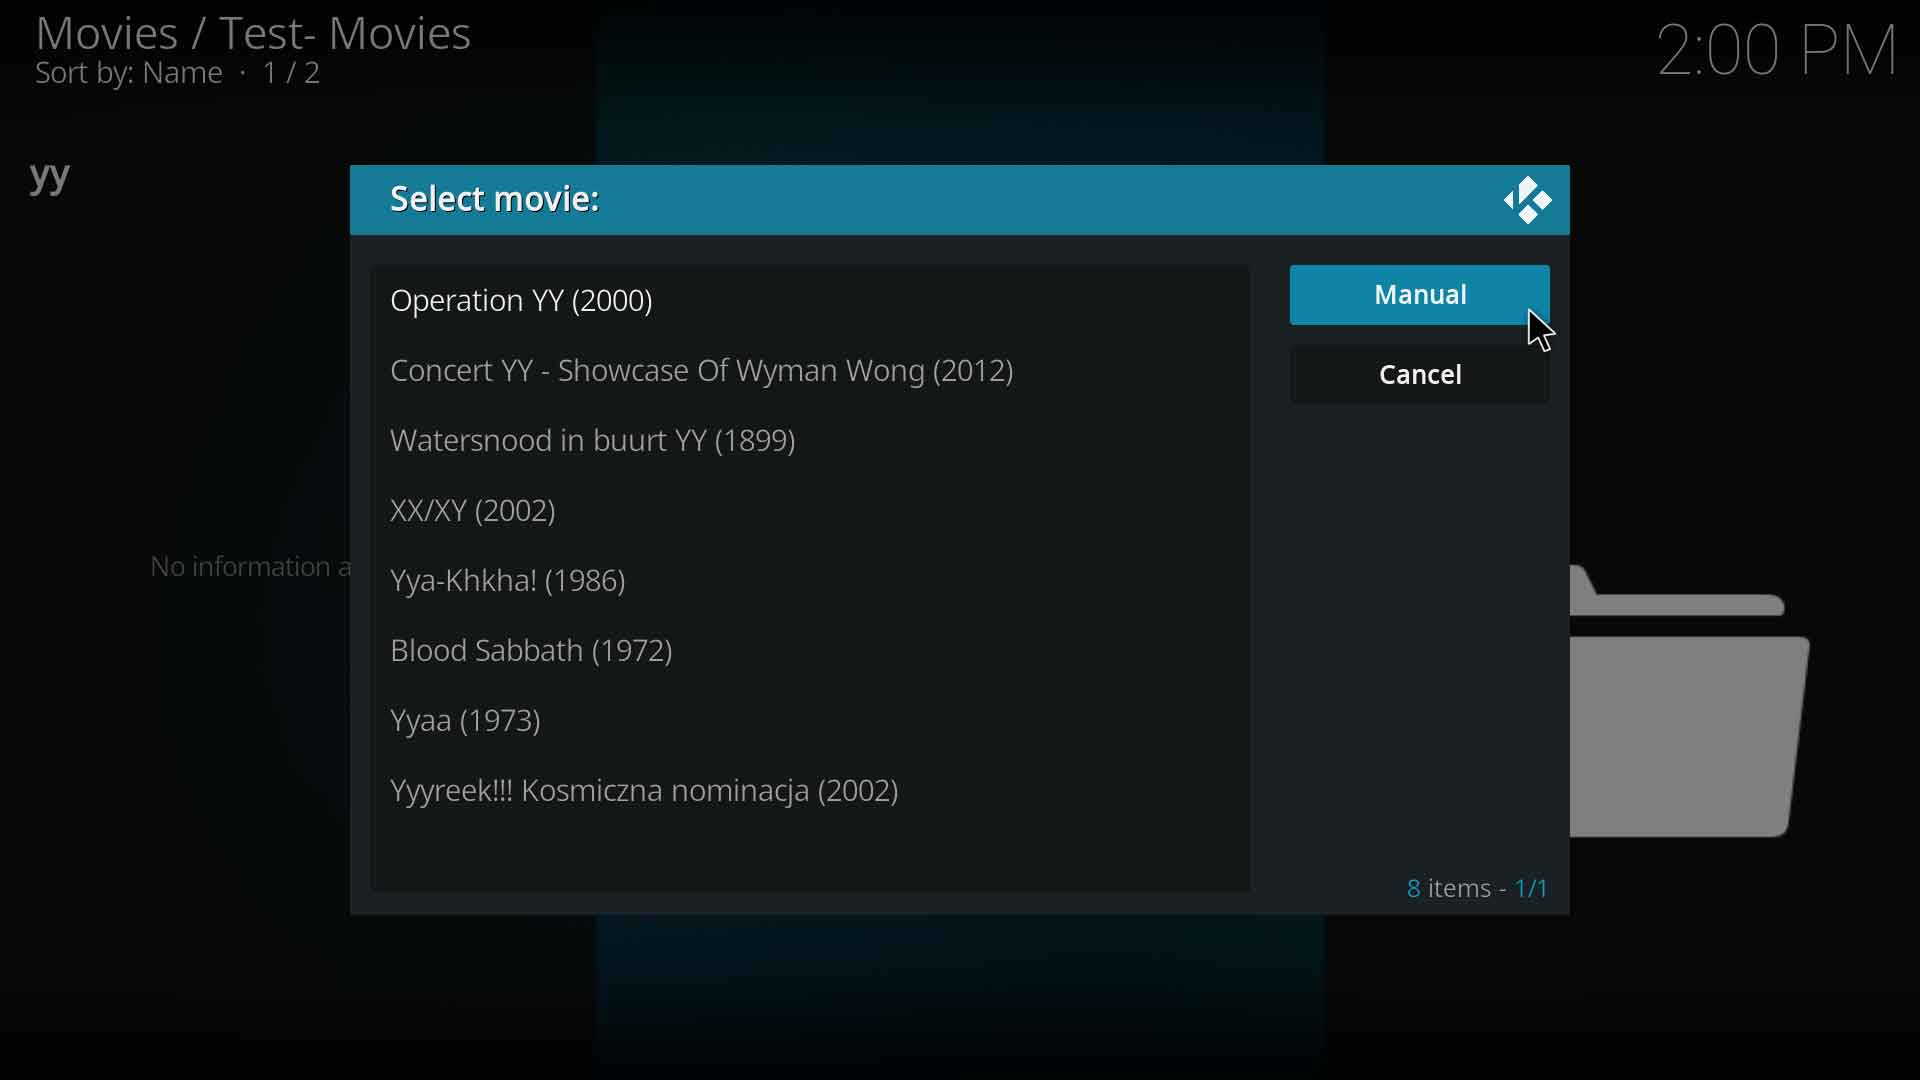 Image 1- If the correct movie is not in the list, select Manual